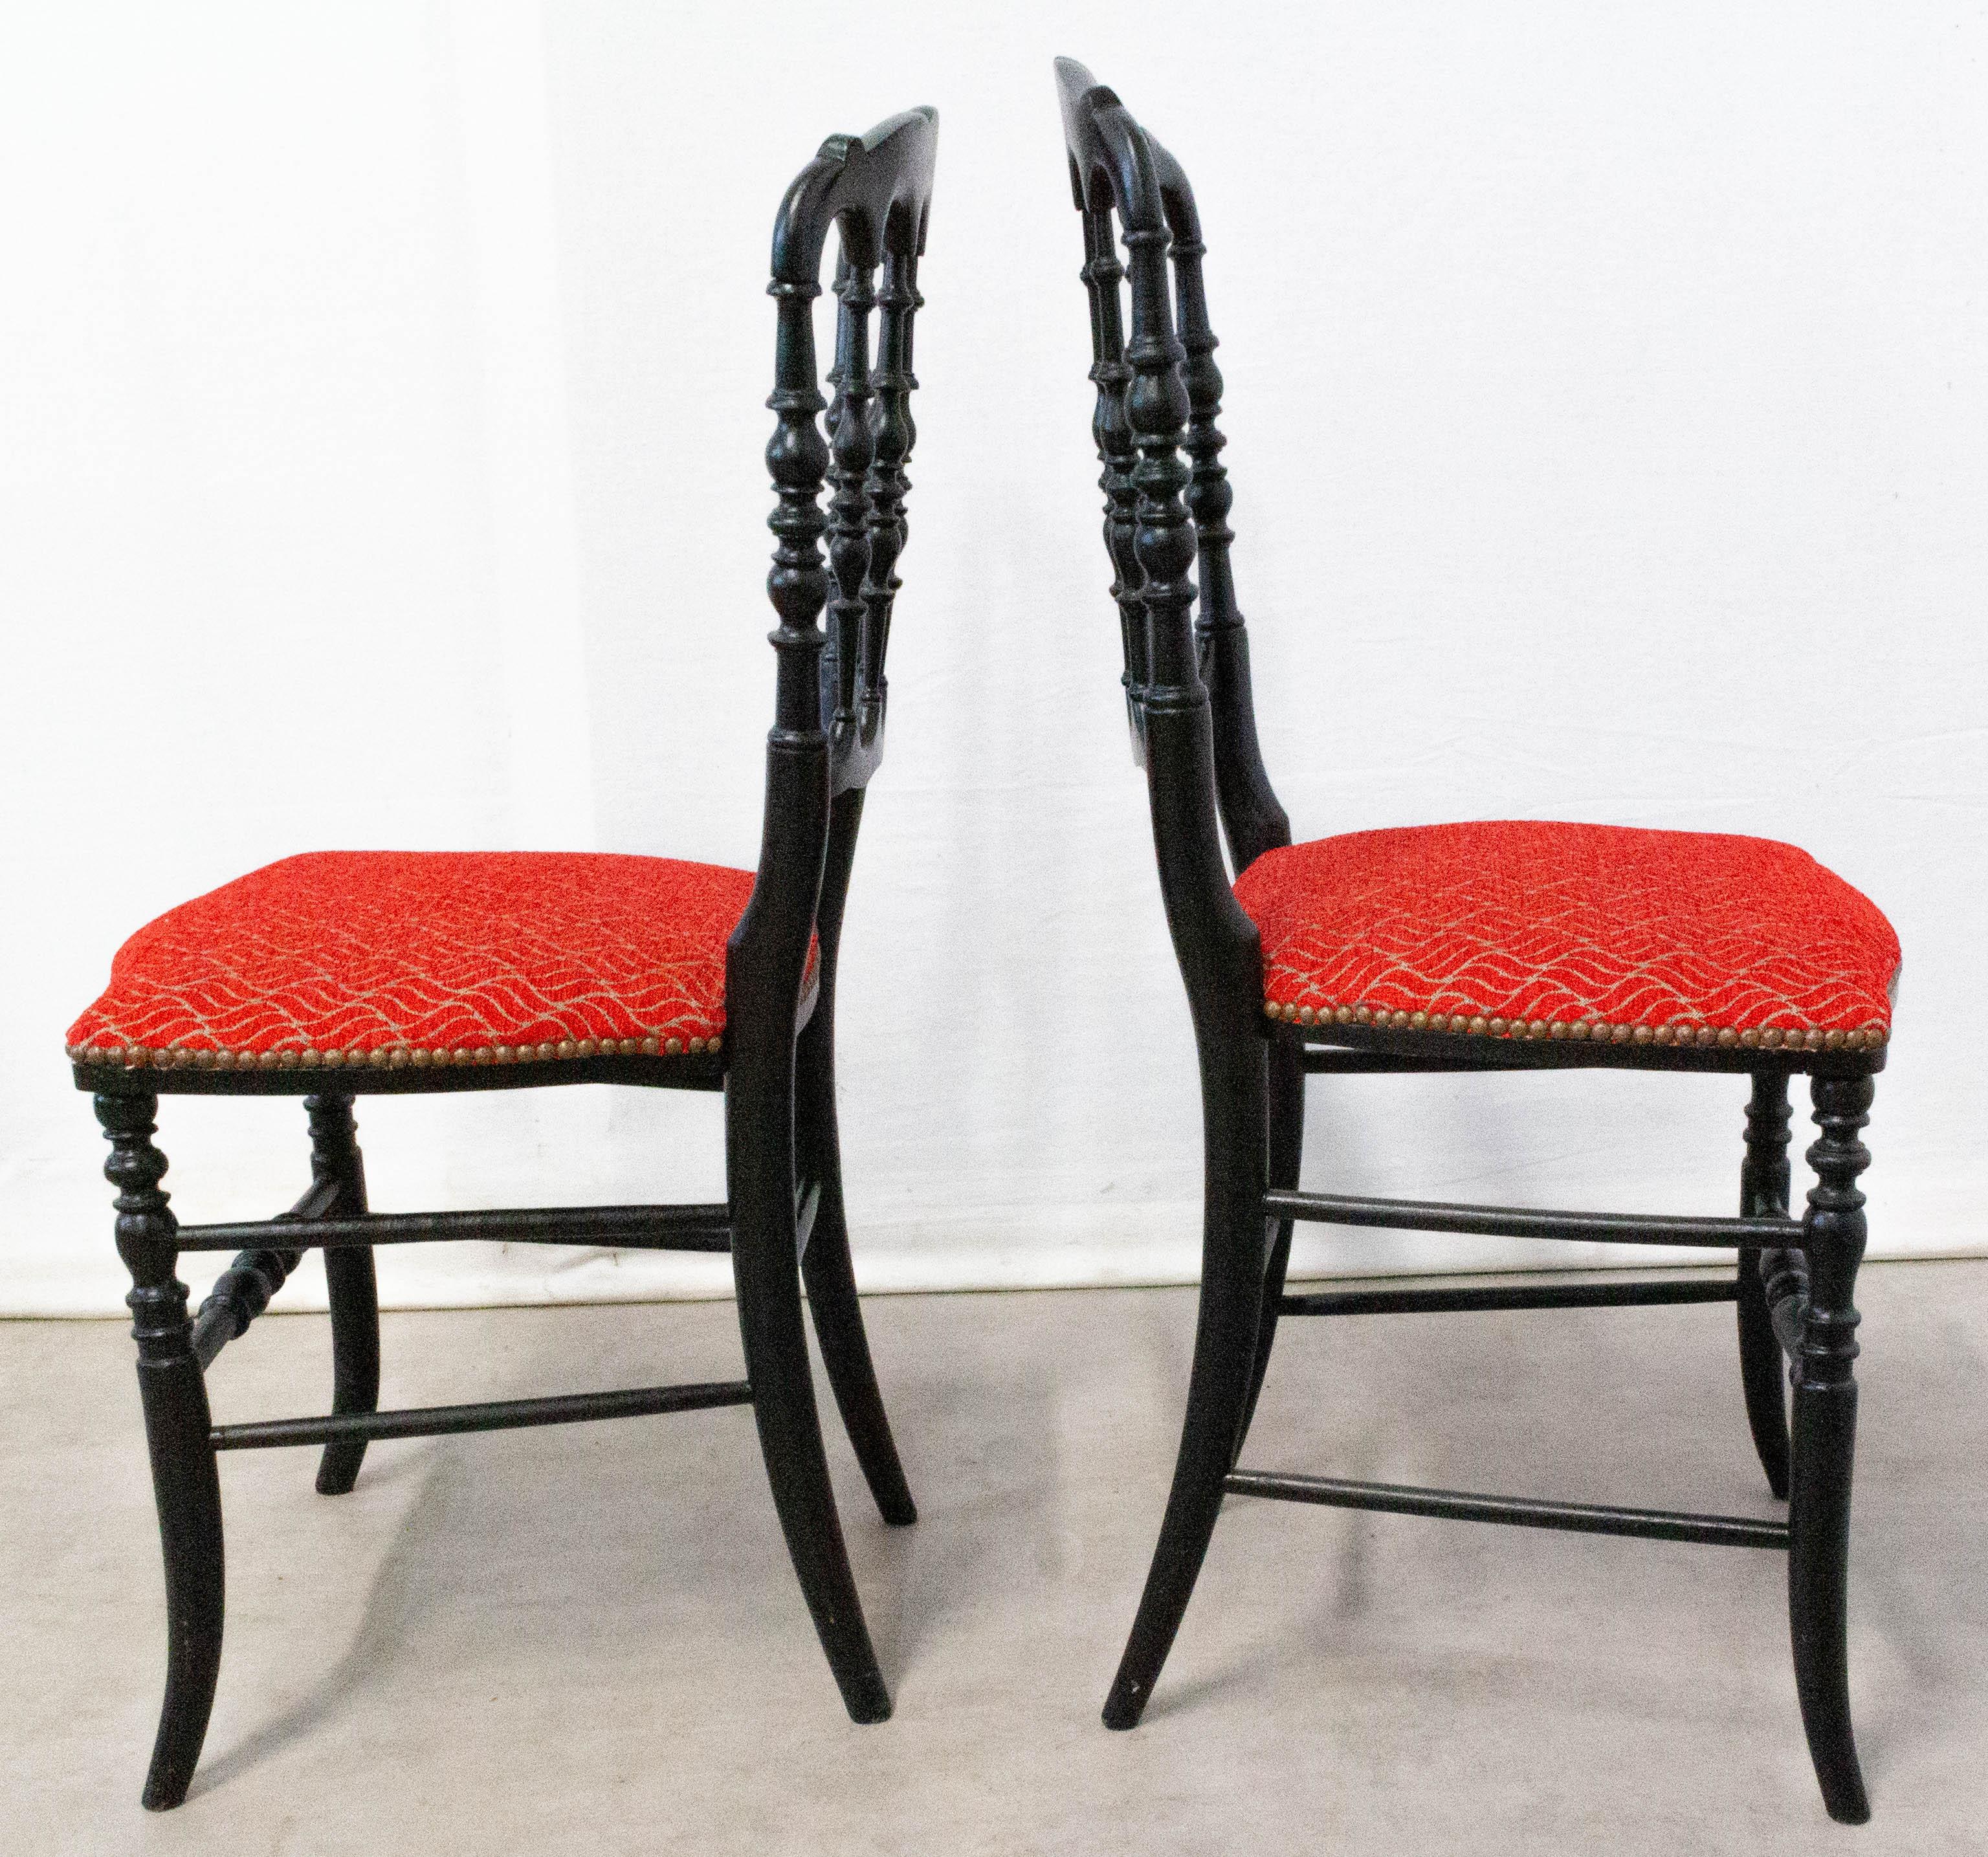 Upholstery Pair of Napoleon III Red Chairs Upholstered French, Late 19th Century For Sale